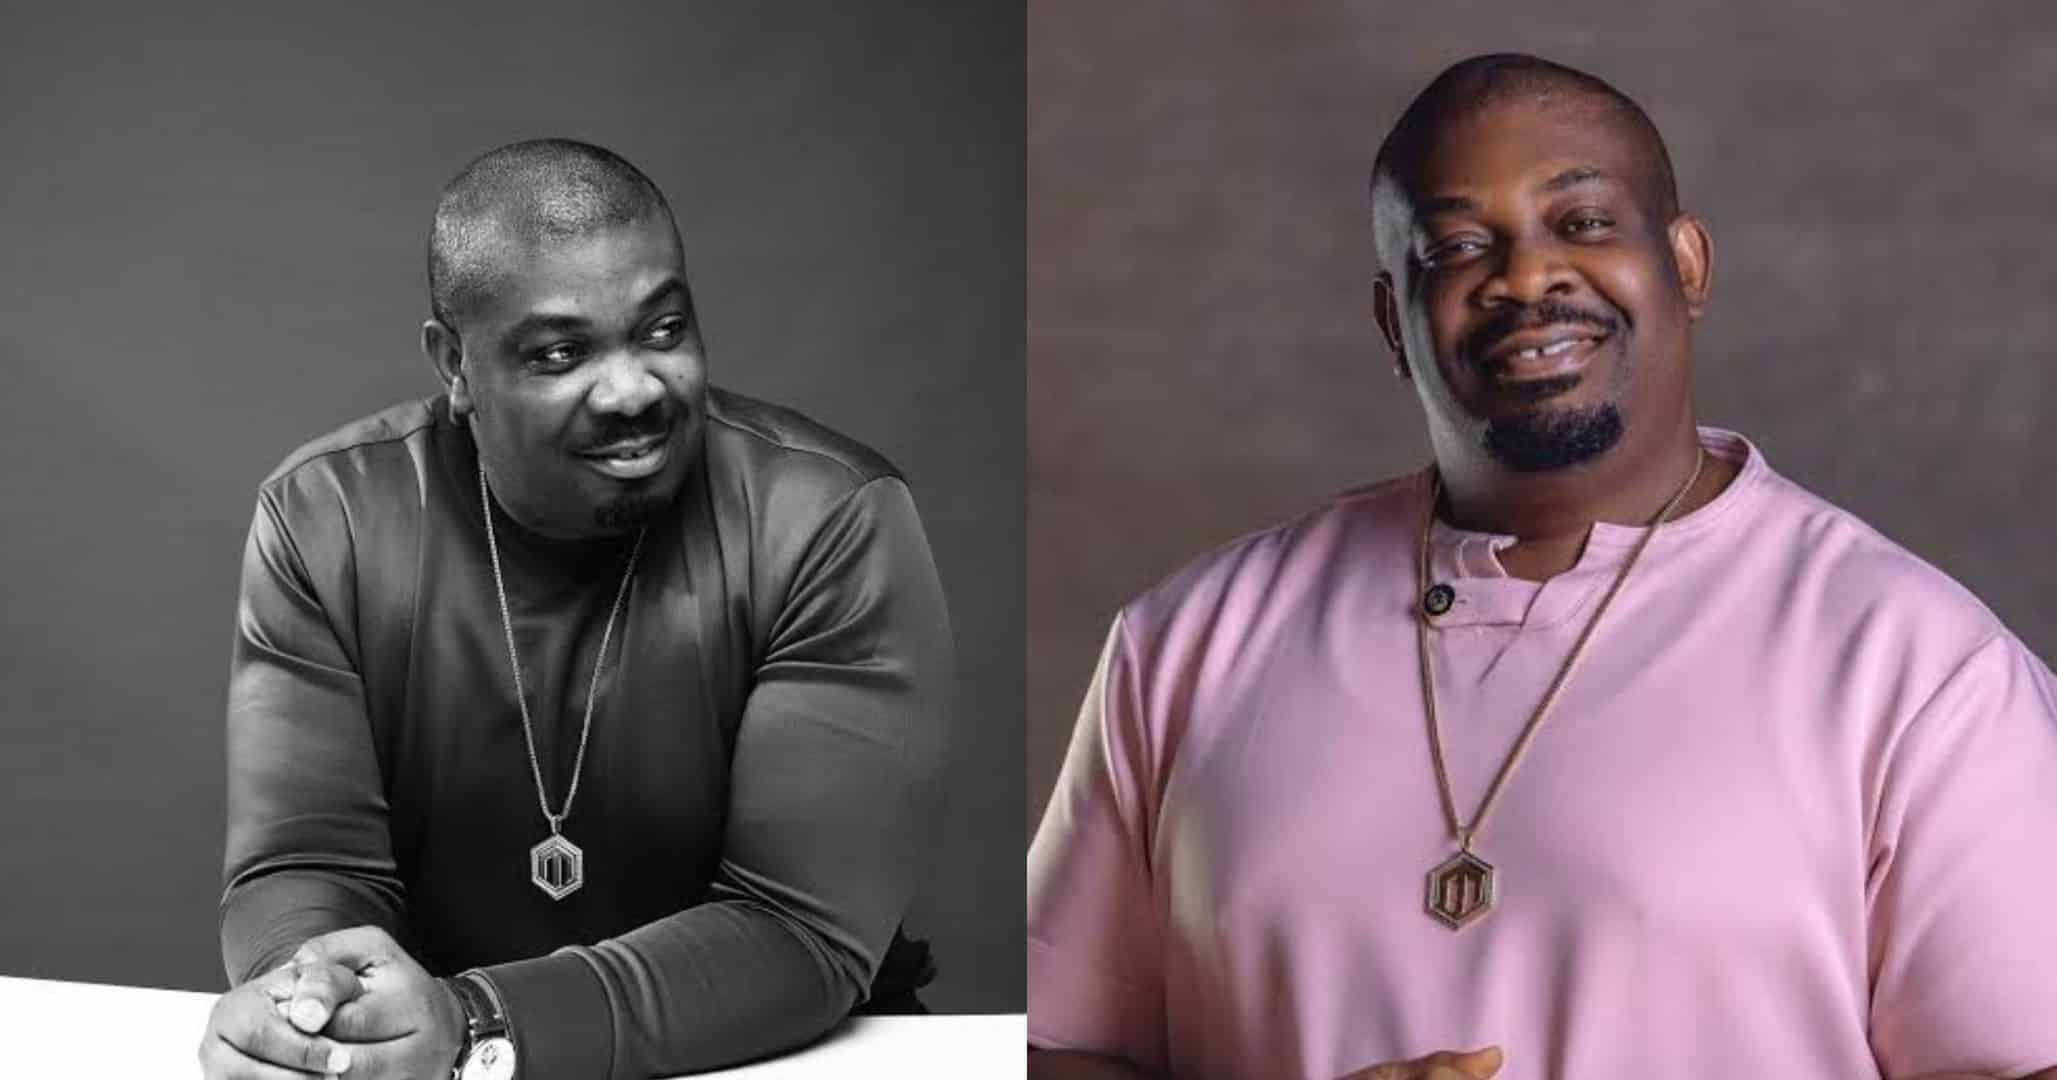 Don Jazzy gives N500K to struggling student who asked for a hug